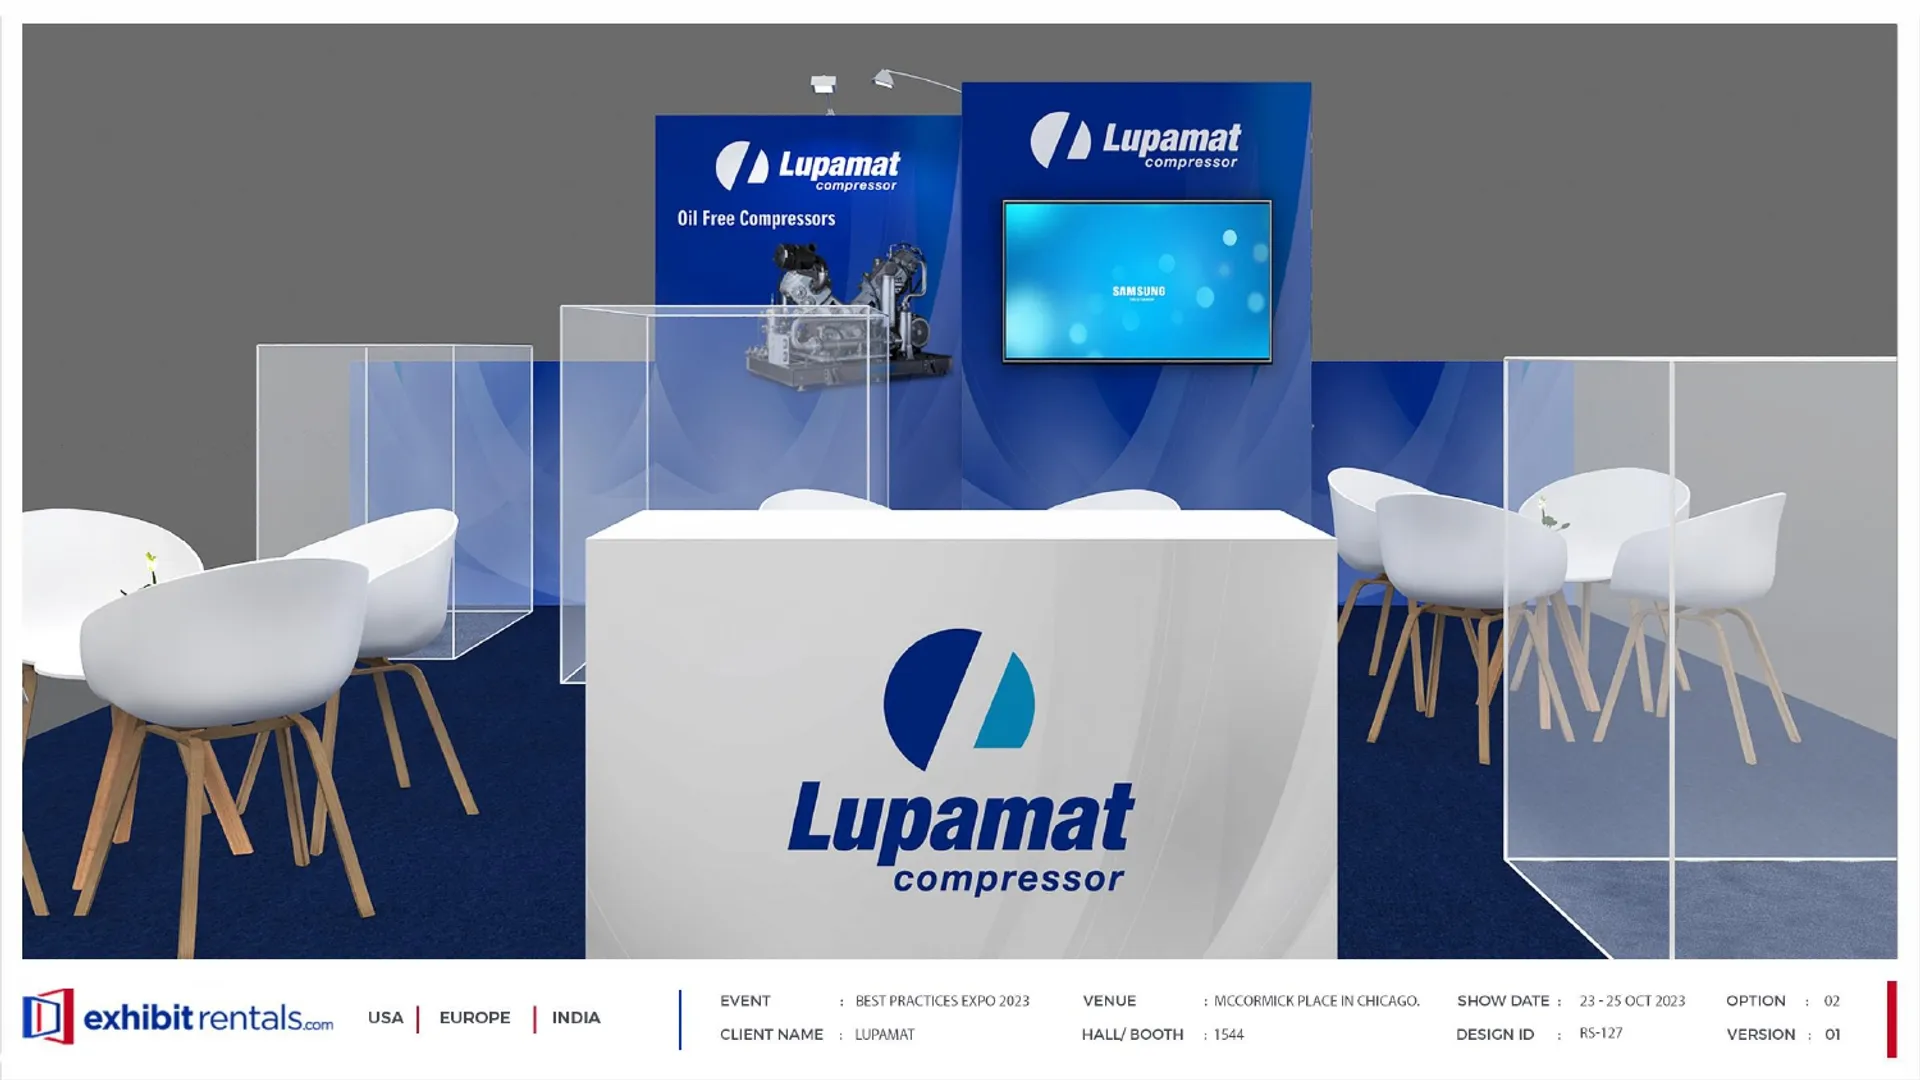 booth-design-projects/Exhibit-Rentals/2024-04-18-40x40-PENINSULA-Project-99/2.1_Lupamat_Best practices expo_ER design proposal-16_page-0001-orrmlm.jpg